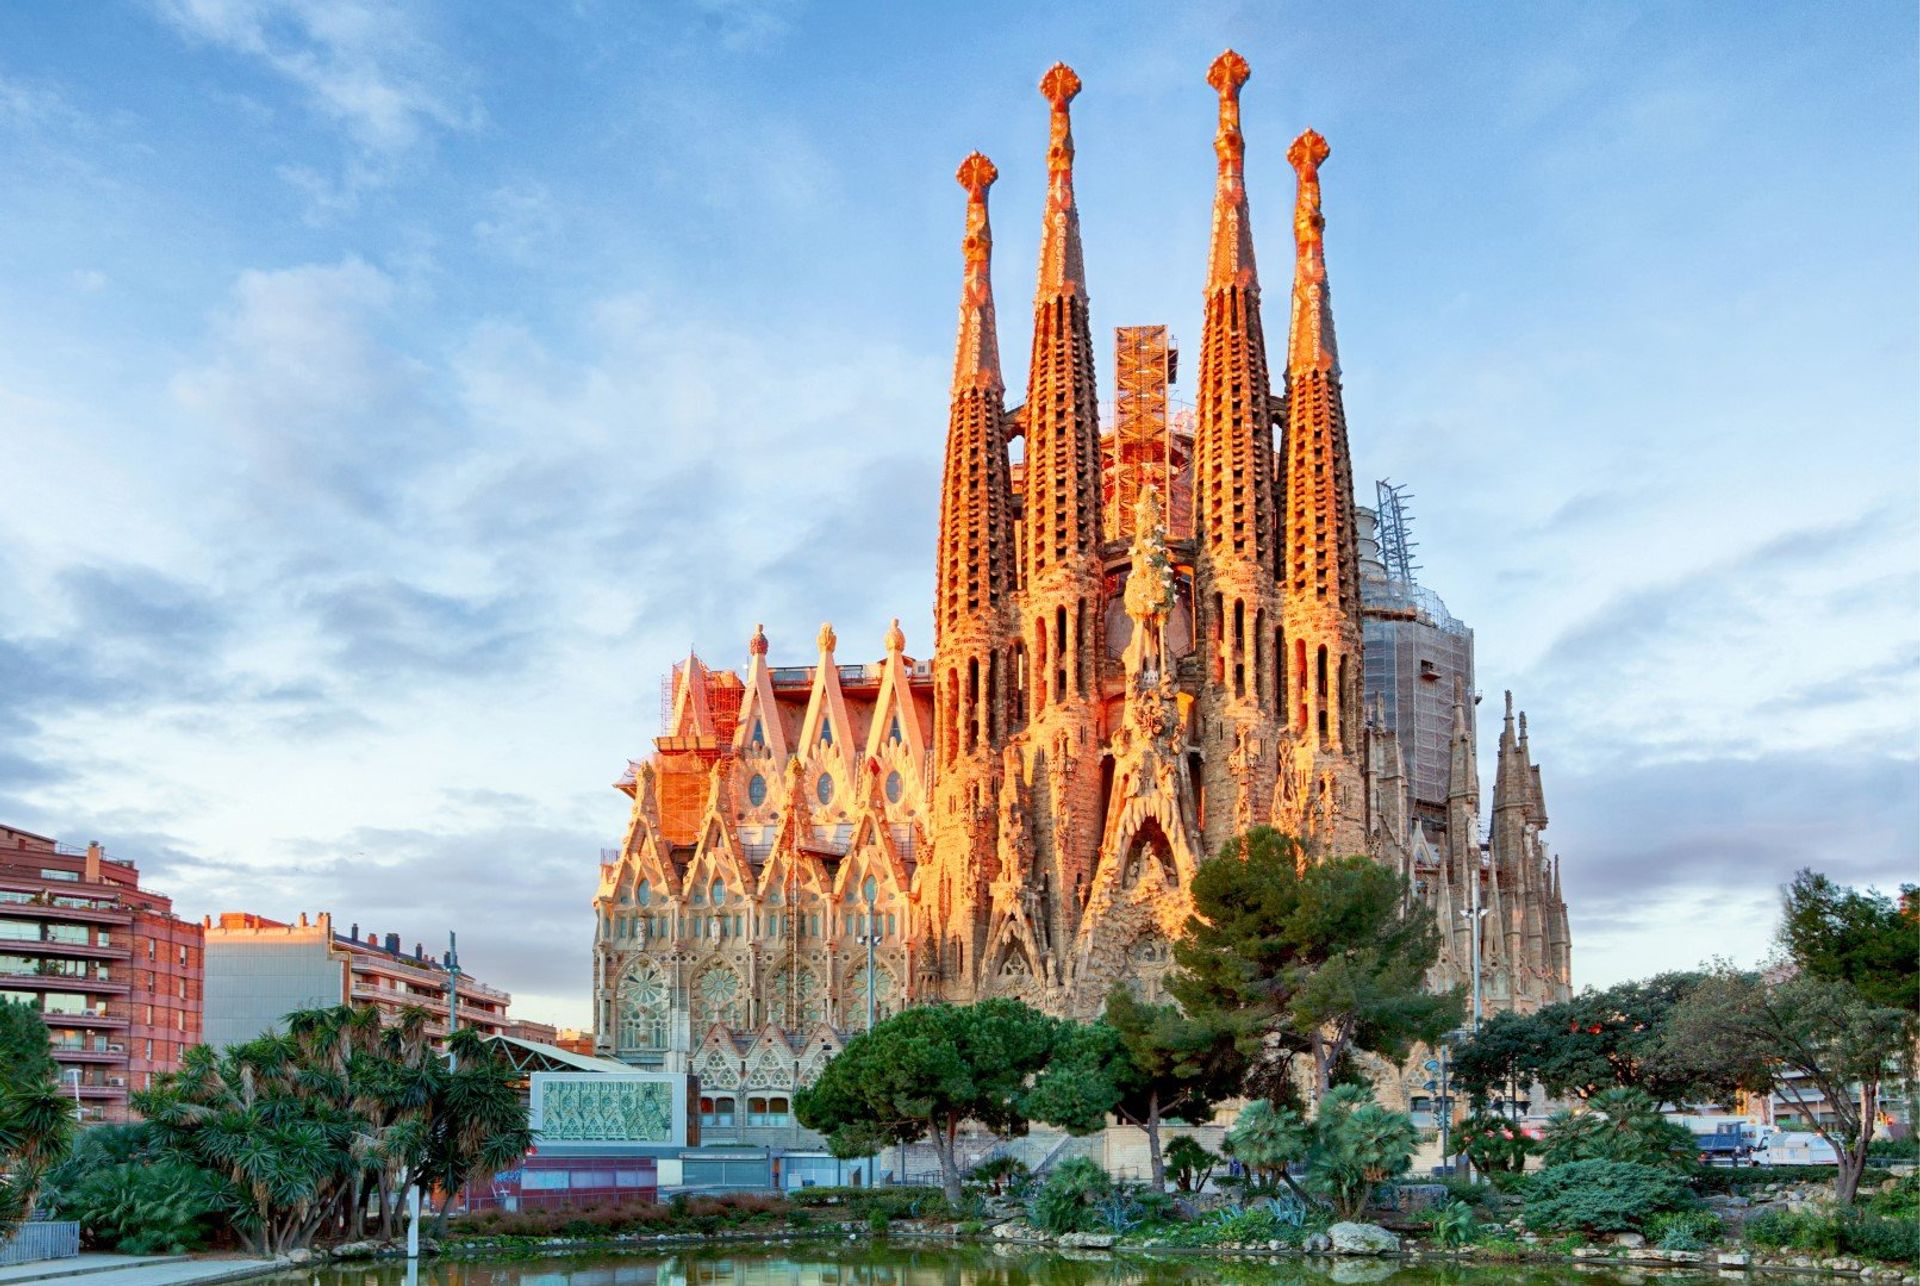 The largest unfinished Roman Catholic church in the world, Sagrada Família, designed by Gaudi